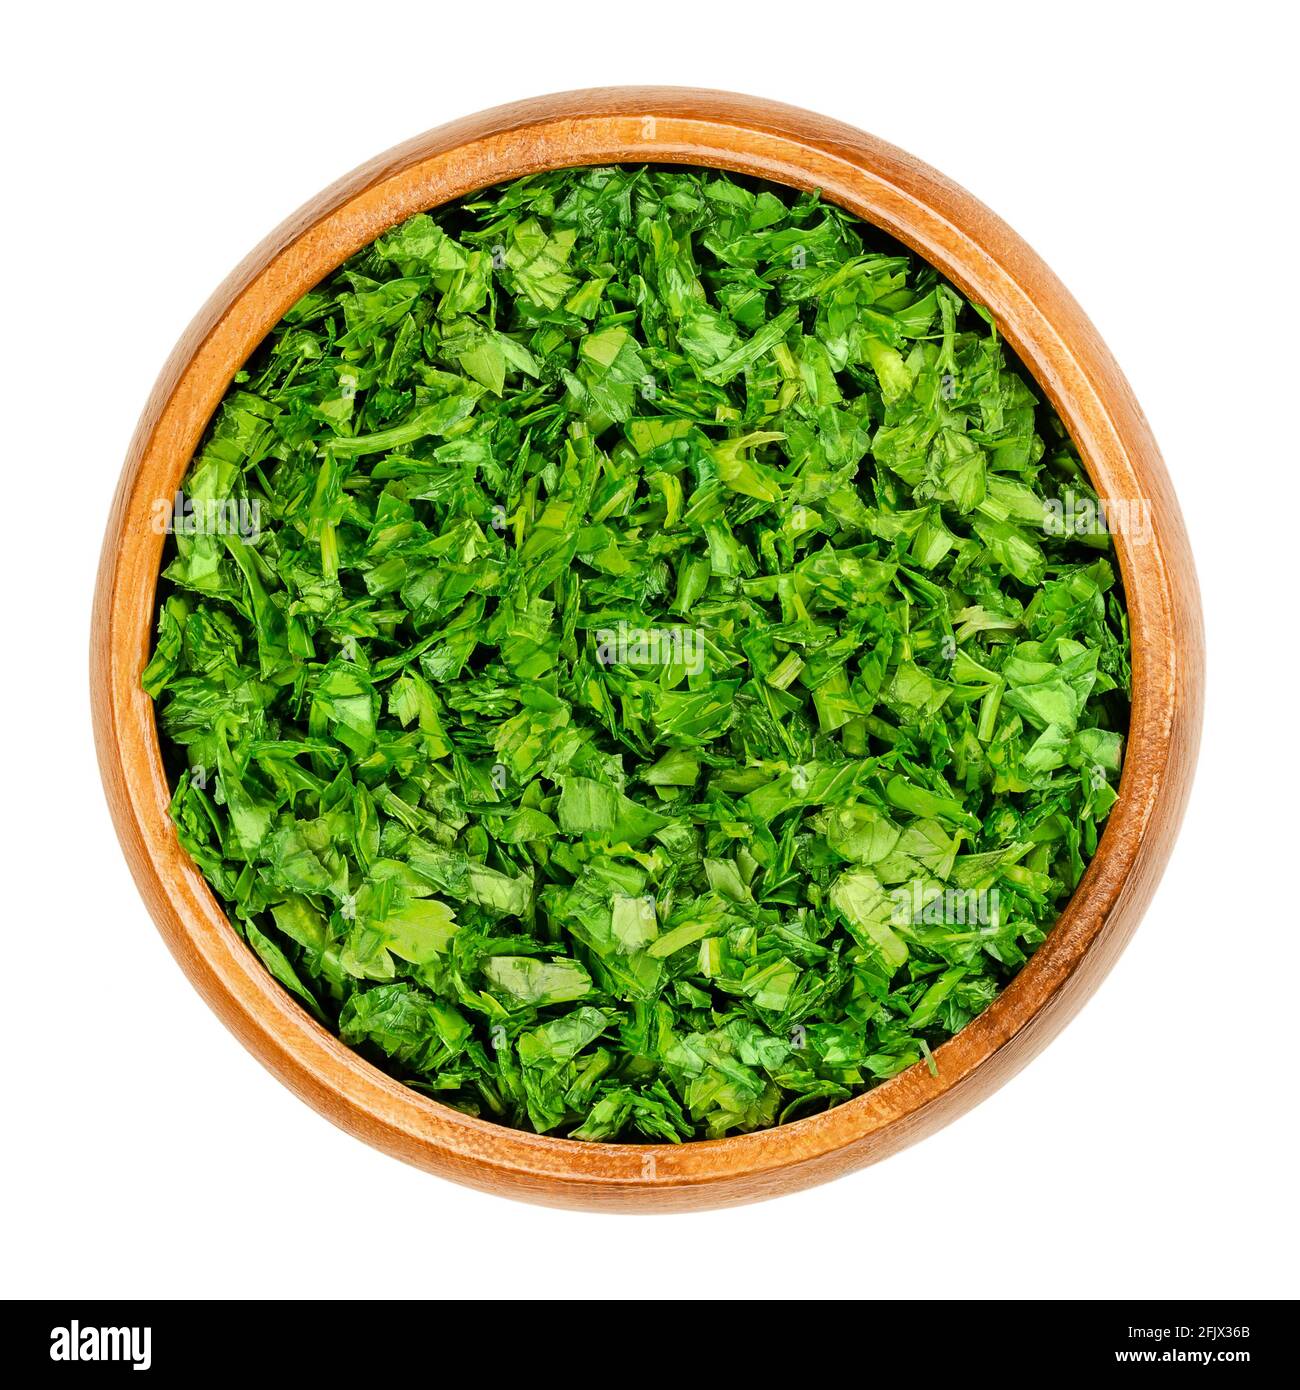 Chopped parsley, in a wooden bowl. Fresh, flat leaved parsley, green leaves of Petroselinum crispum, used as herb, spice and vegetable. Close-up. Stock Photo